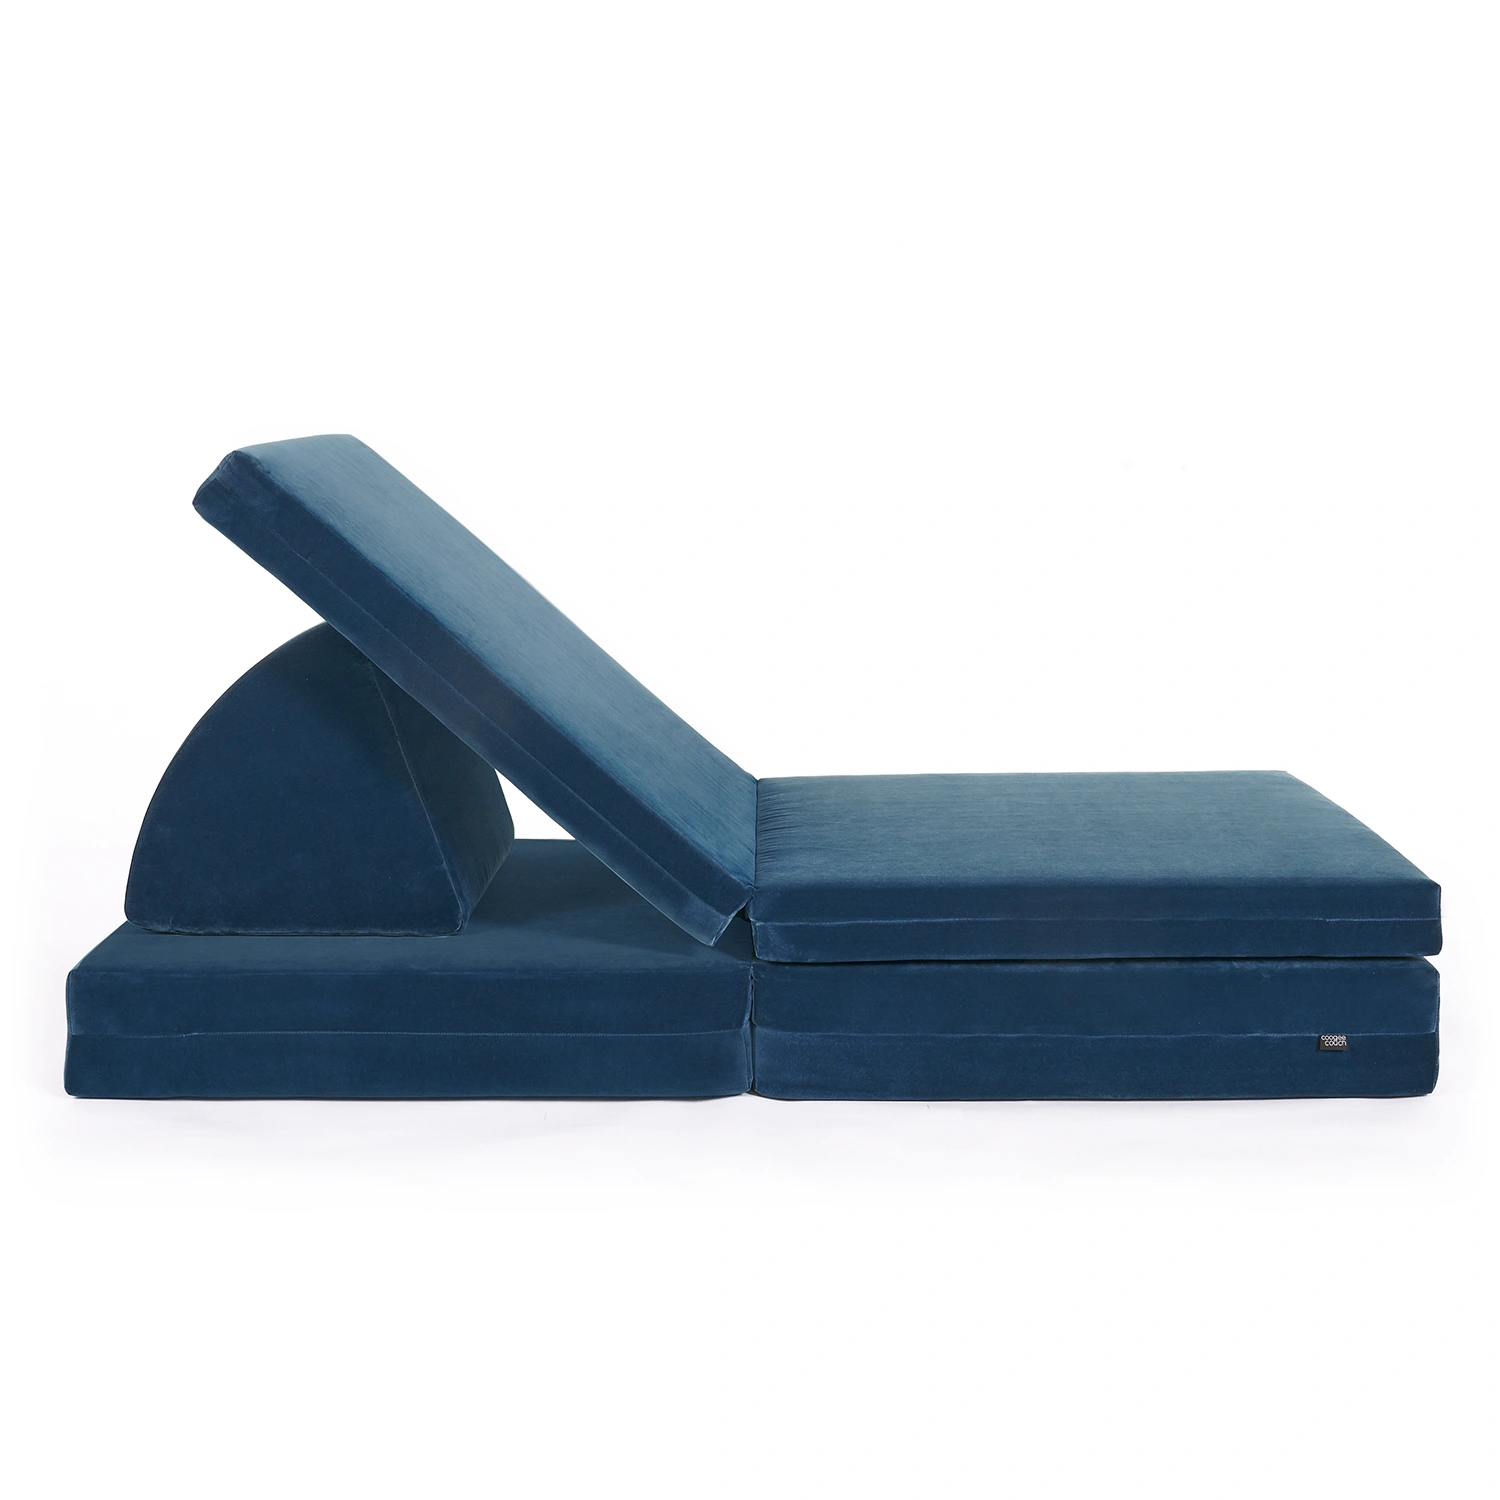 coogeecouch | Kindersofa | Serie: meeracle | Farbe: sea-blue hellblau | Ansicht: Front Lounge | made in Germany